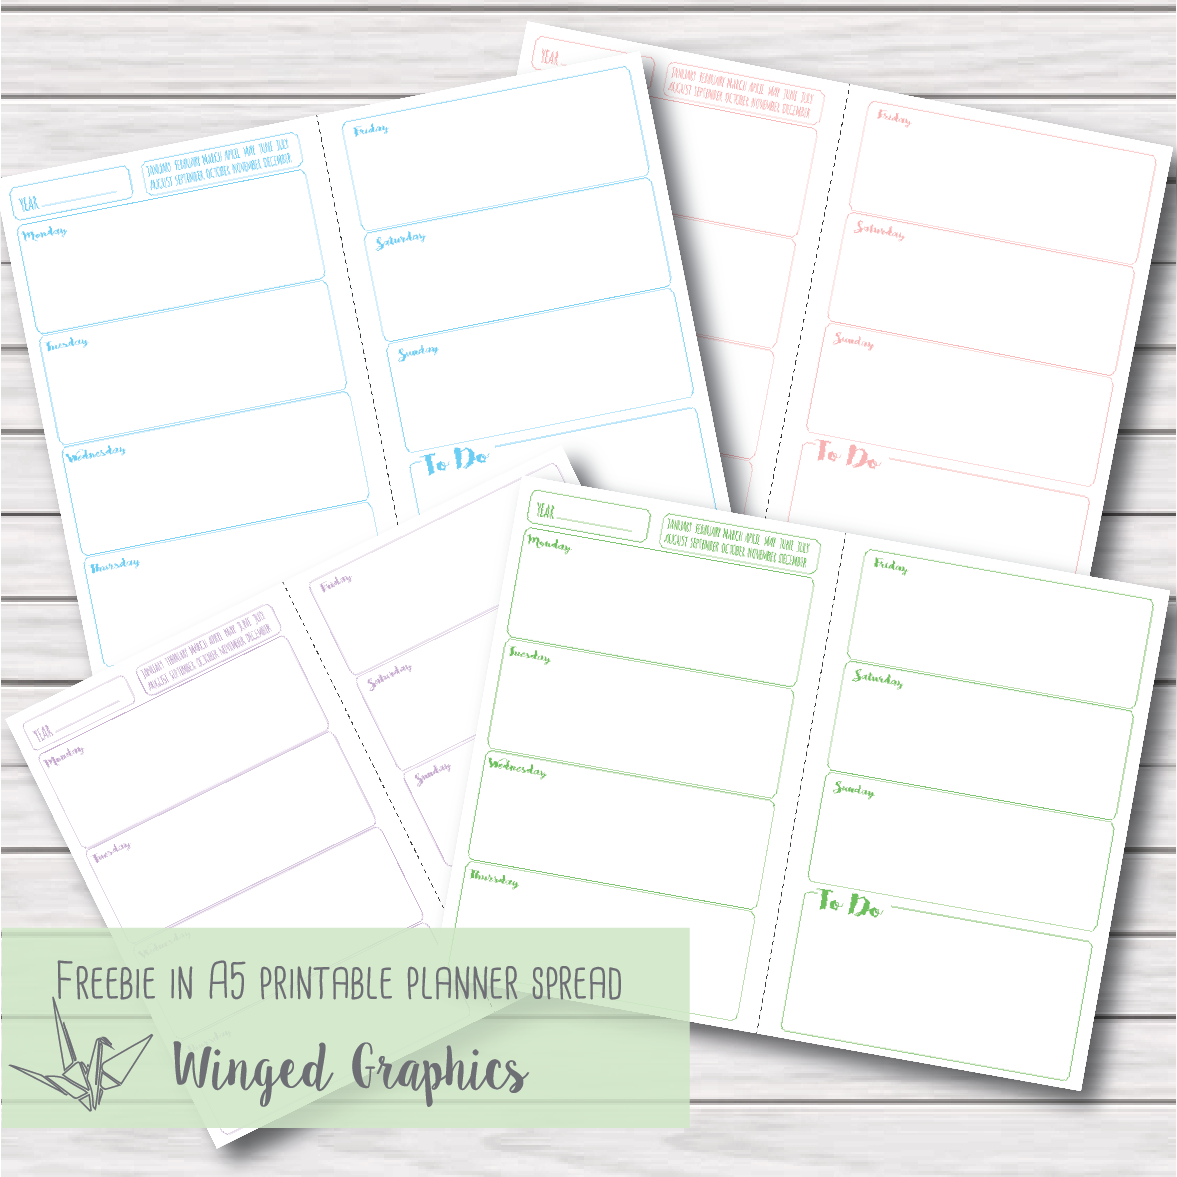 winged-graphics-freebie-friday-3-printable-a5-planner-inserts